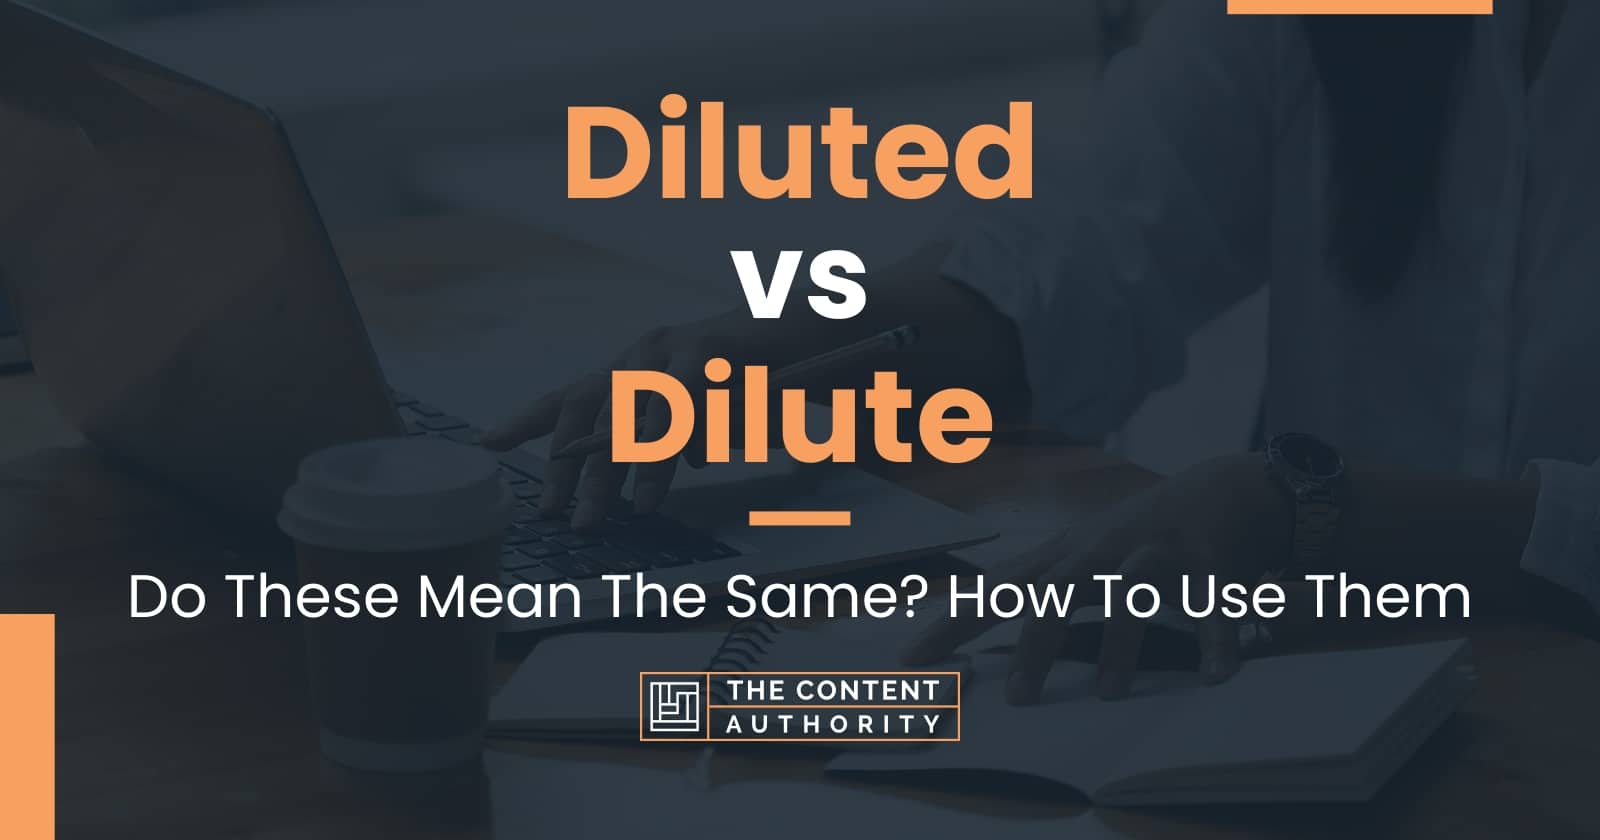 Diluted vs Dilute: Do These Mean The Same? How To Use Them